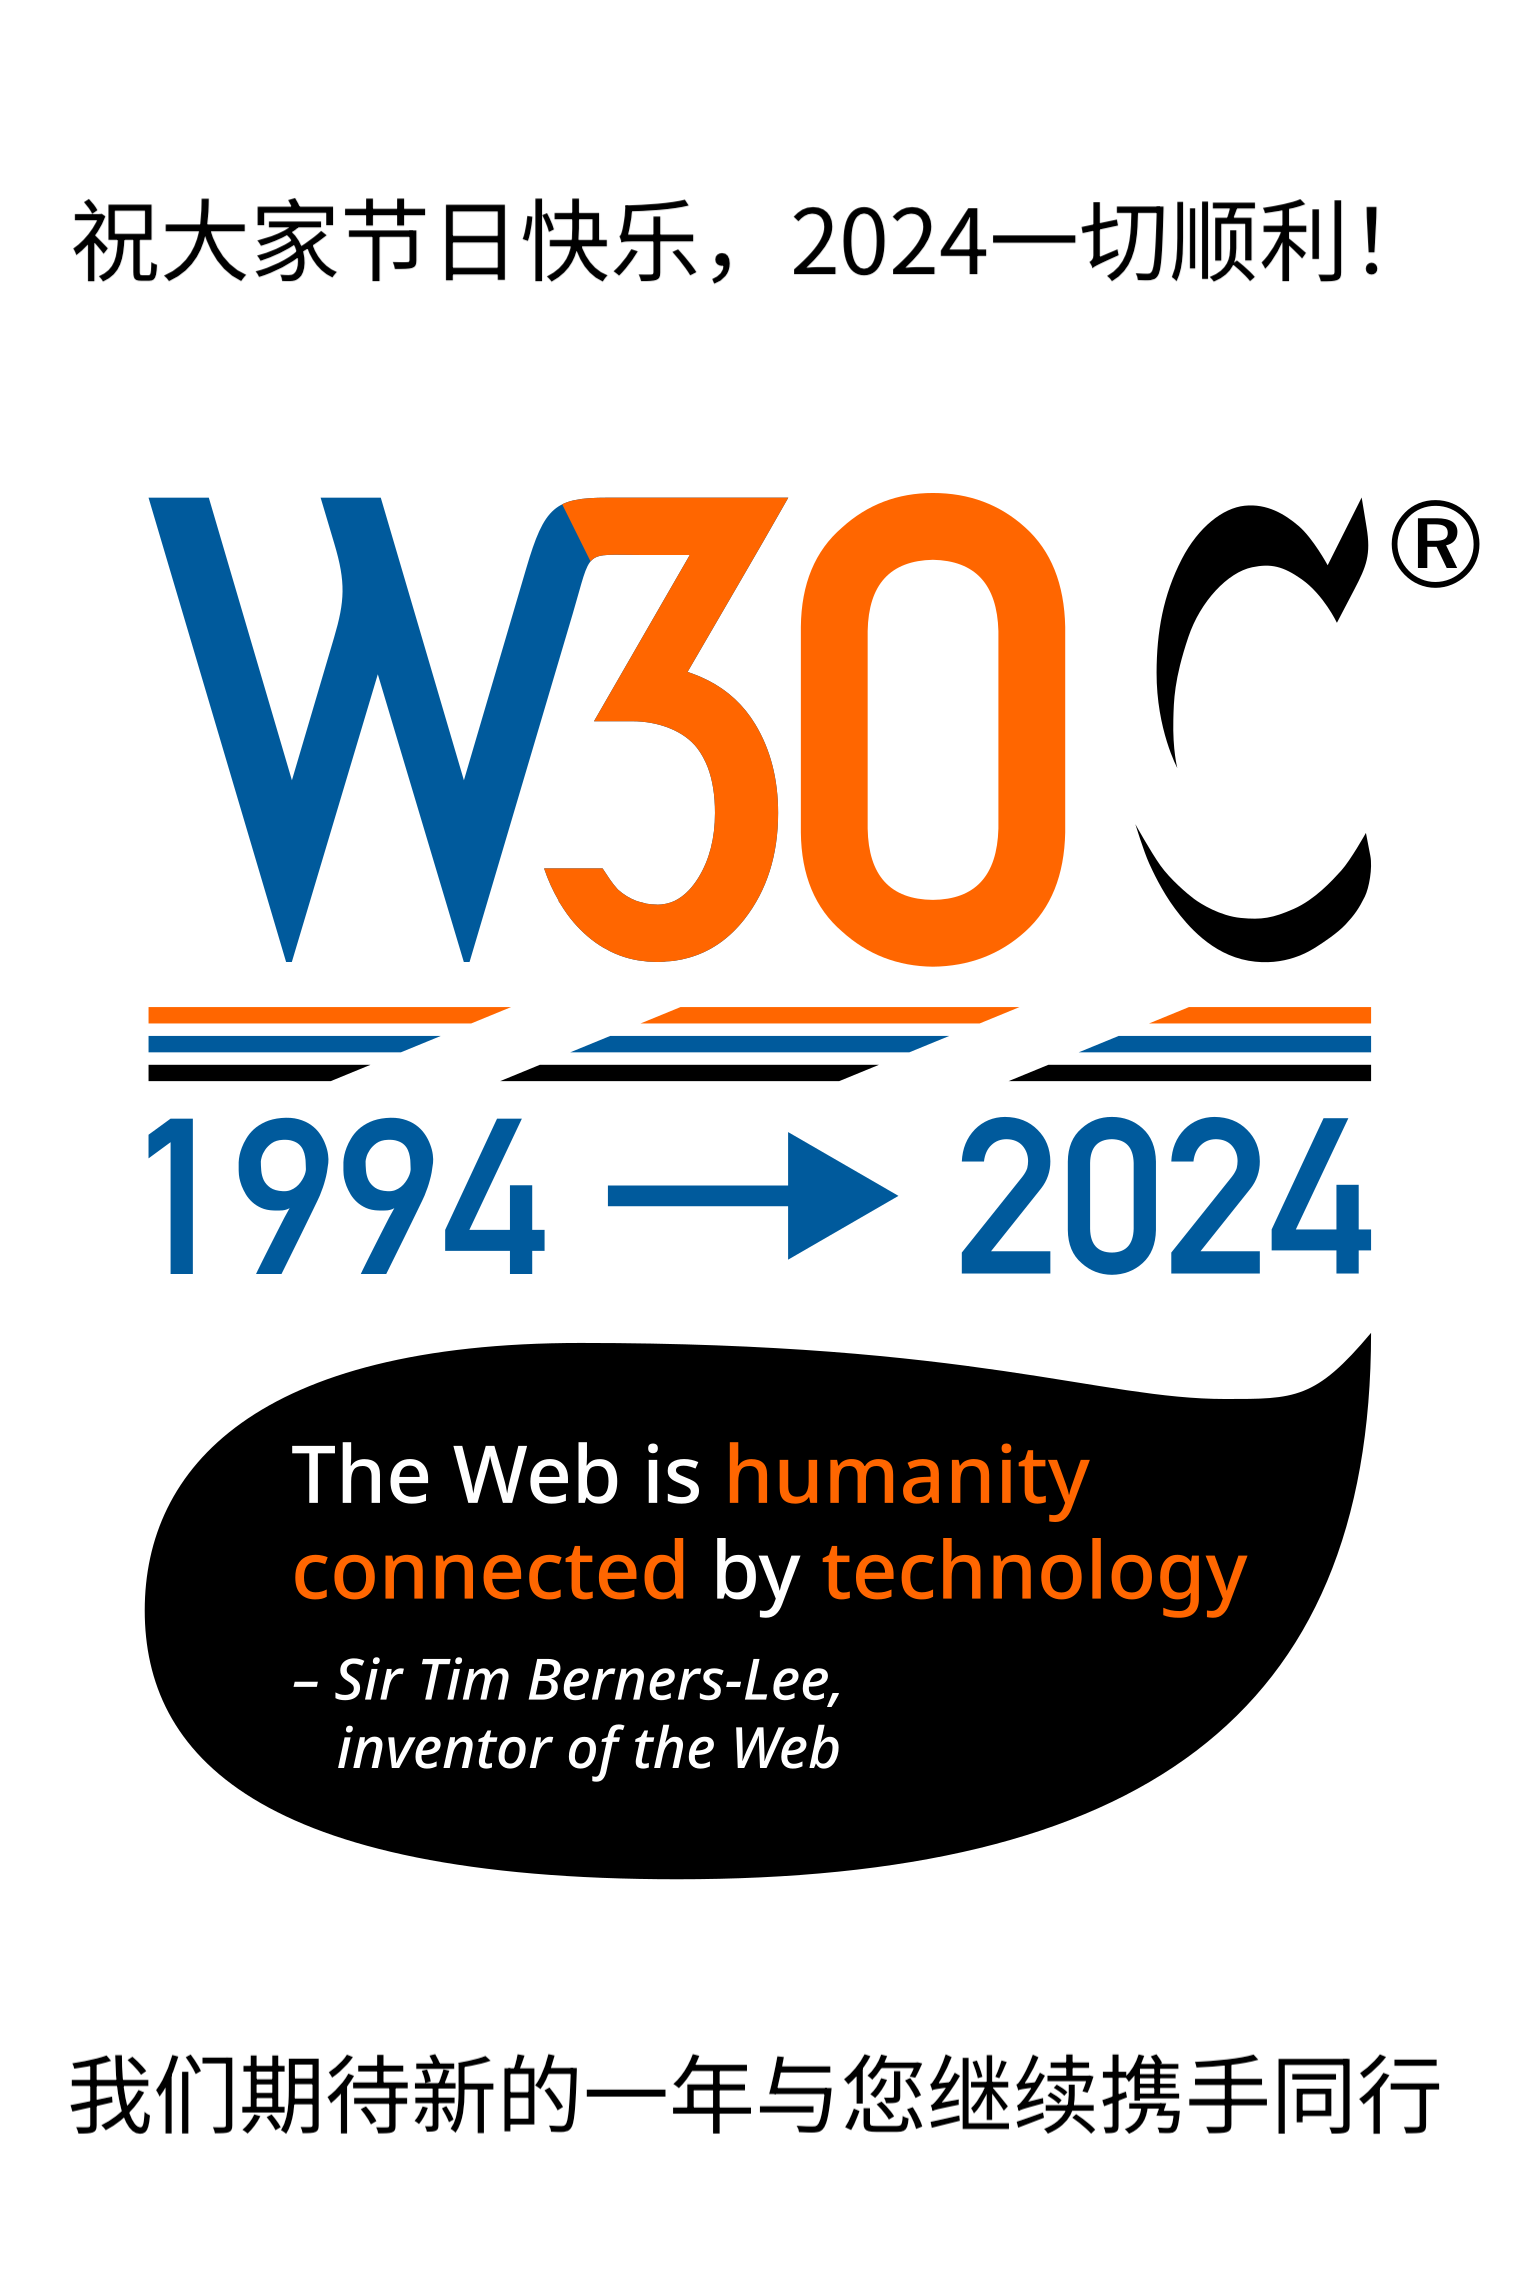 W3C 30周年纪念logo，W30C (1994-2024)；引用 Tim Berners-Lee 的话：“the web is humanity connected by technology” ；来自 W3C 的祝福语。